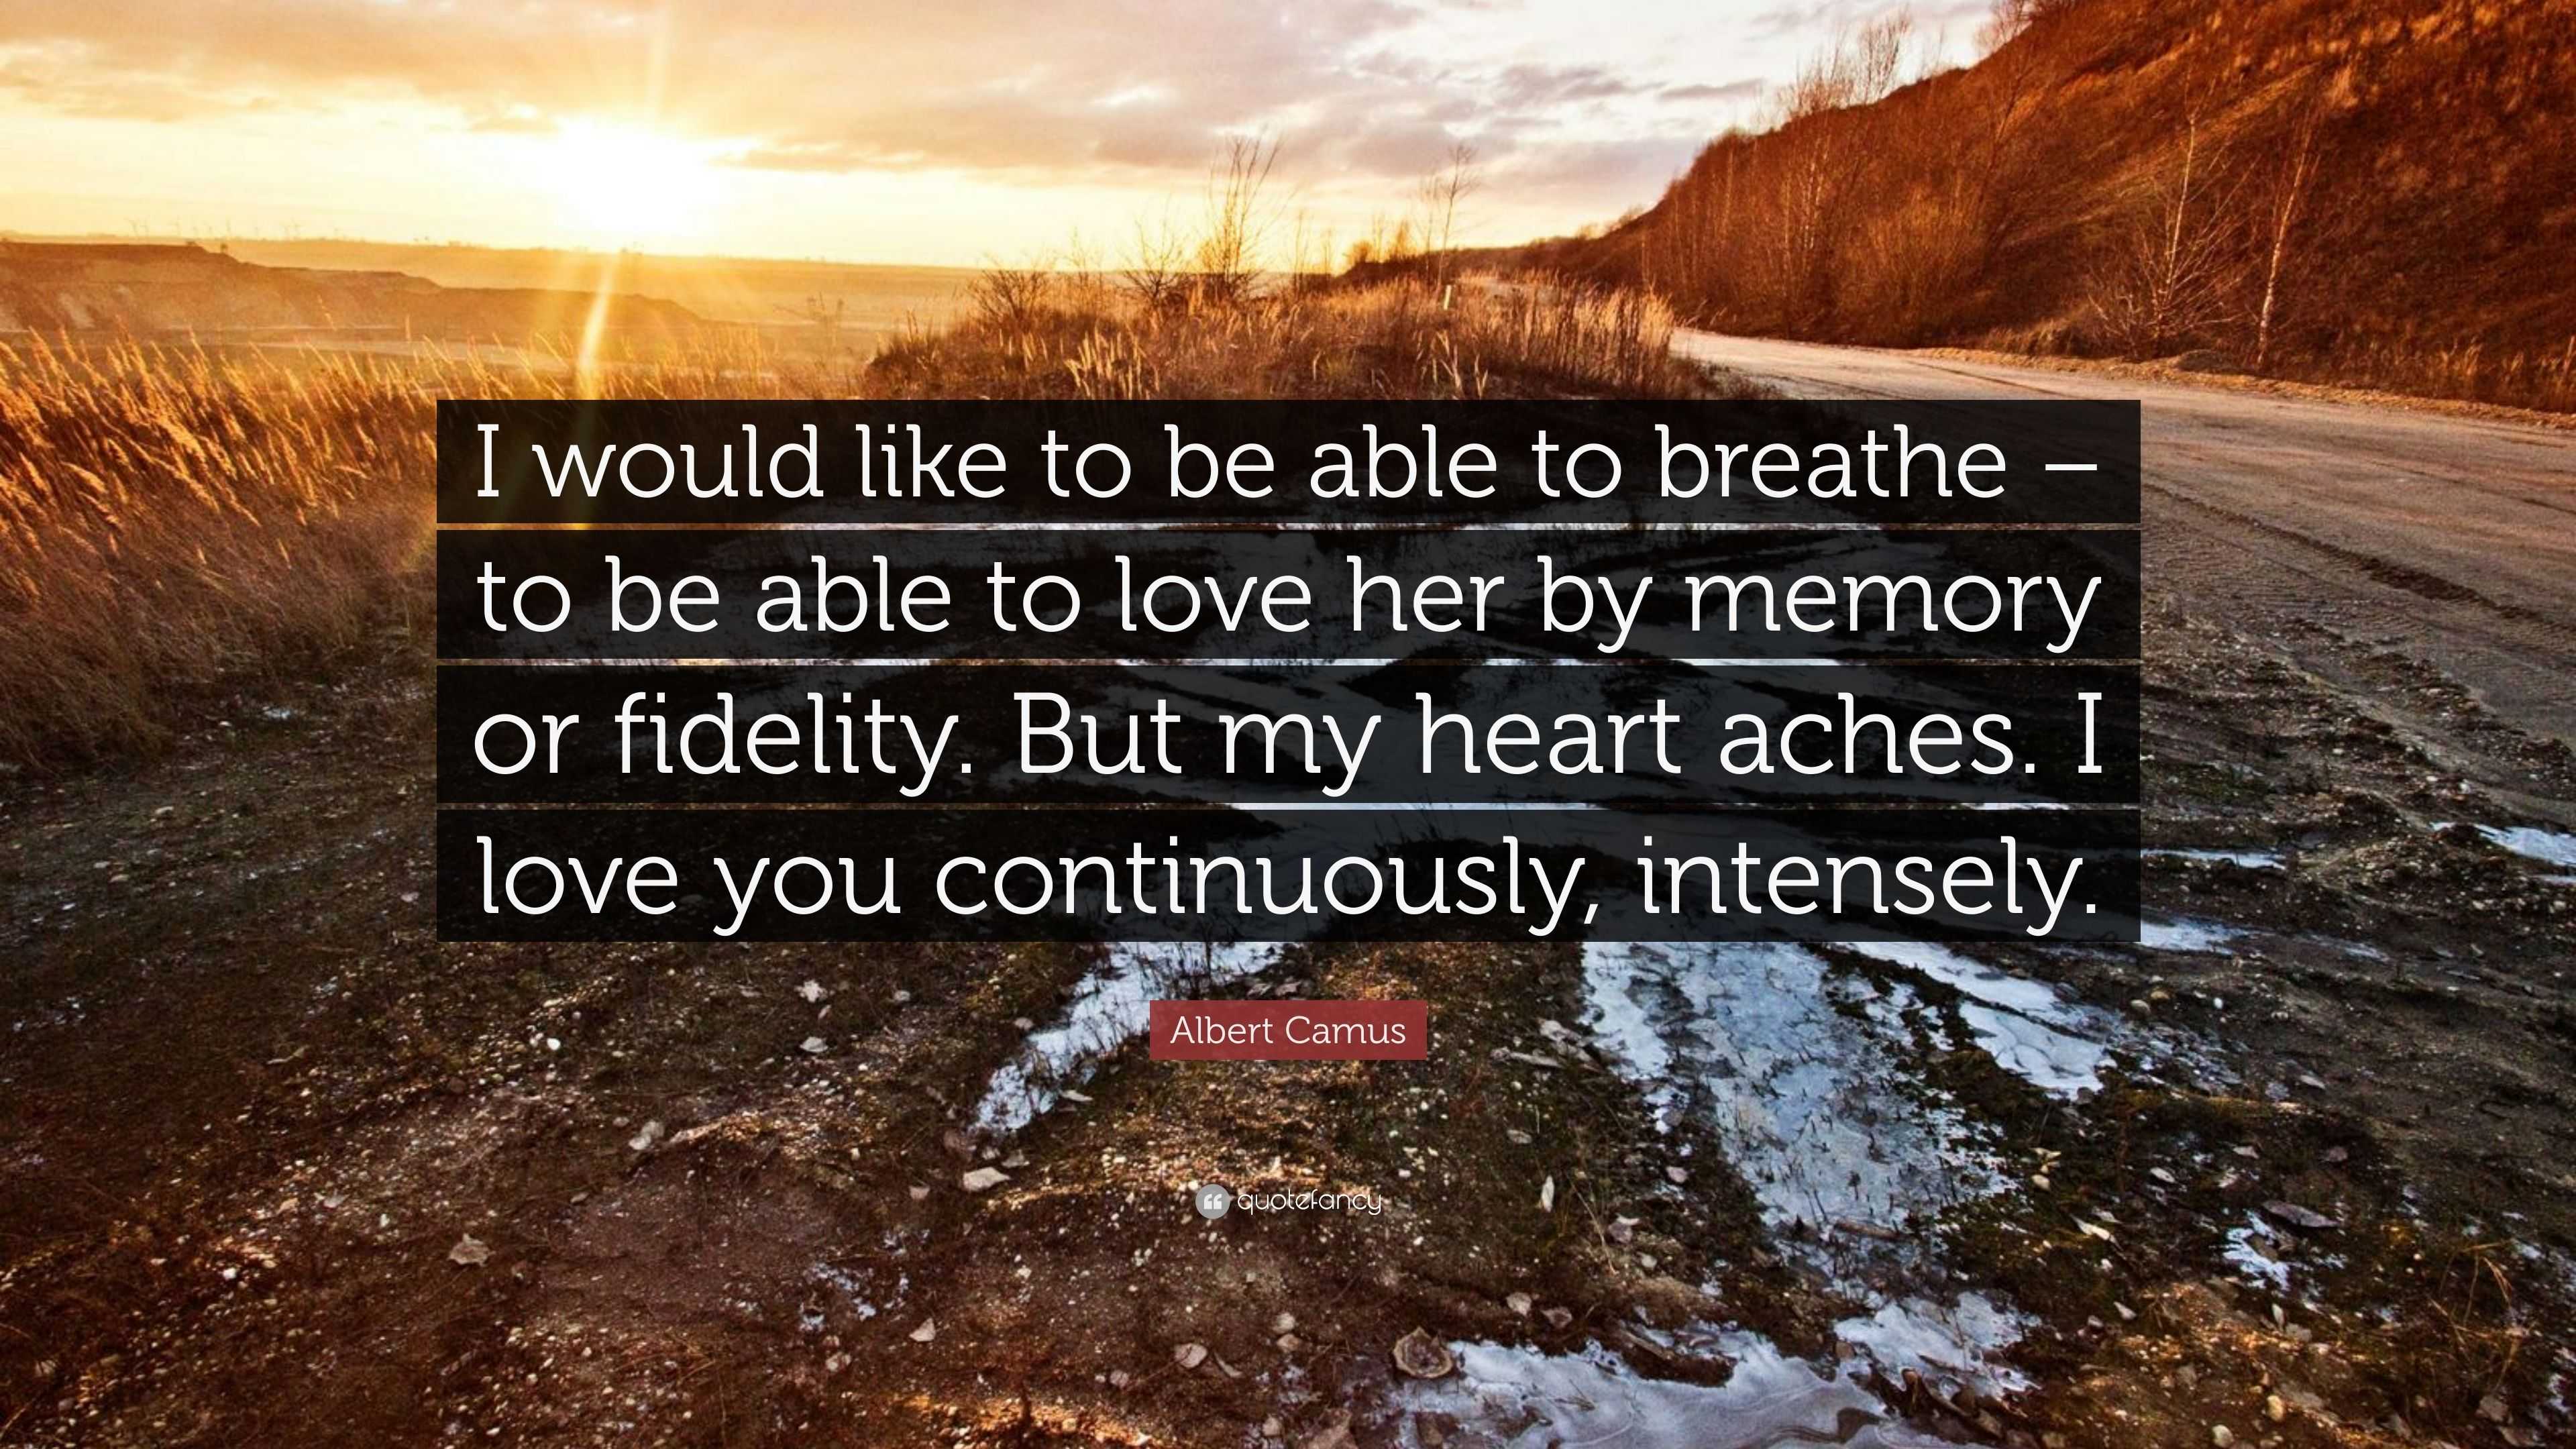 Albert Camus Quote “I would like to be able to breathe – to be